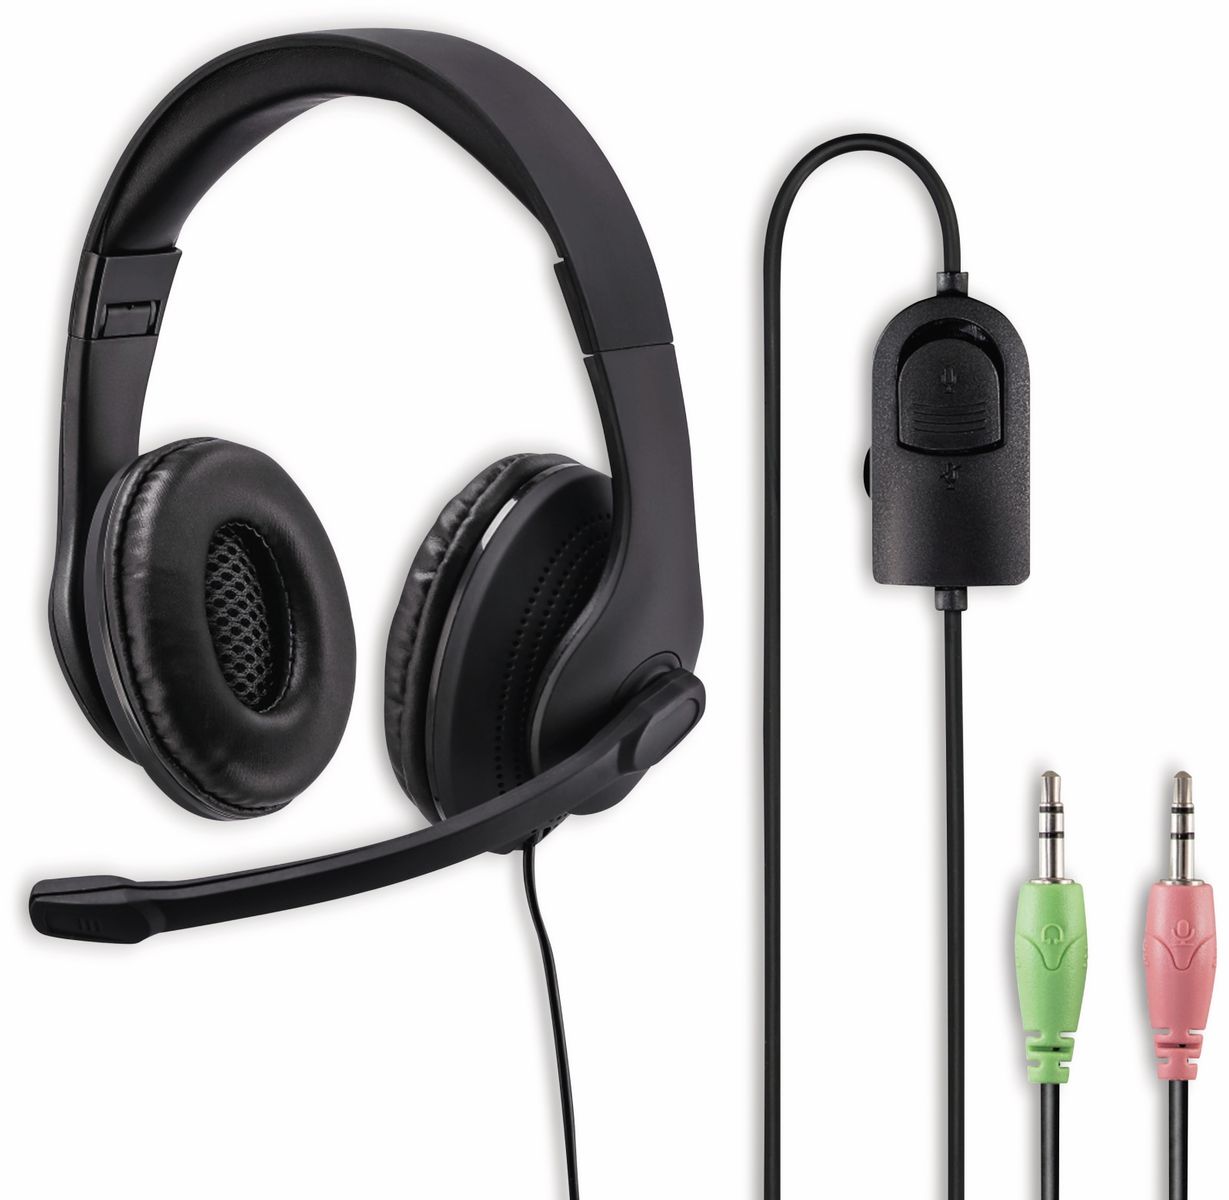 Hama Hs-p200 Pc Office Stereo Headset (with Volume Control And Adjustable Microp